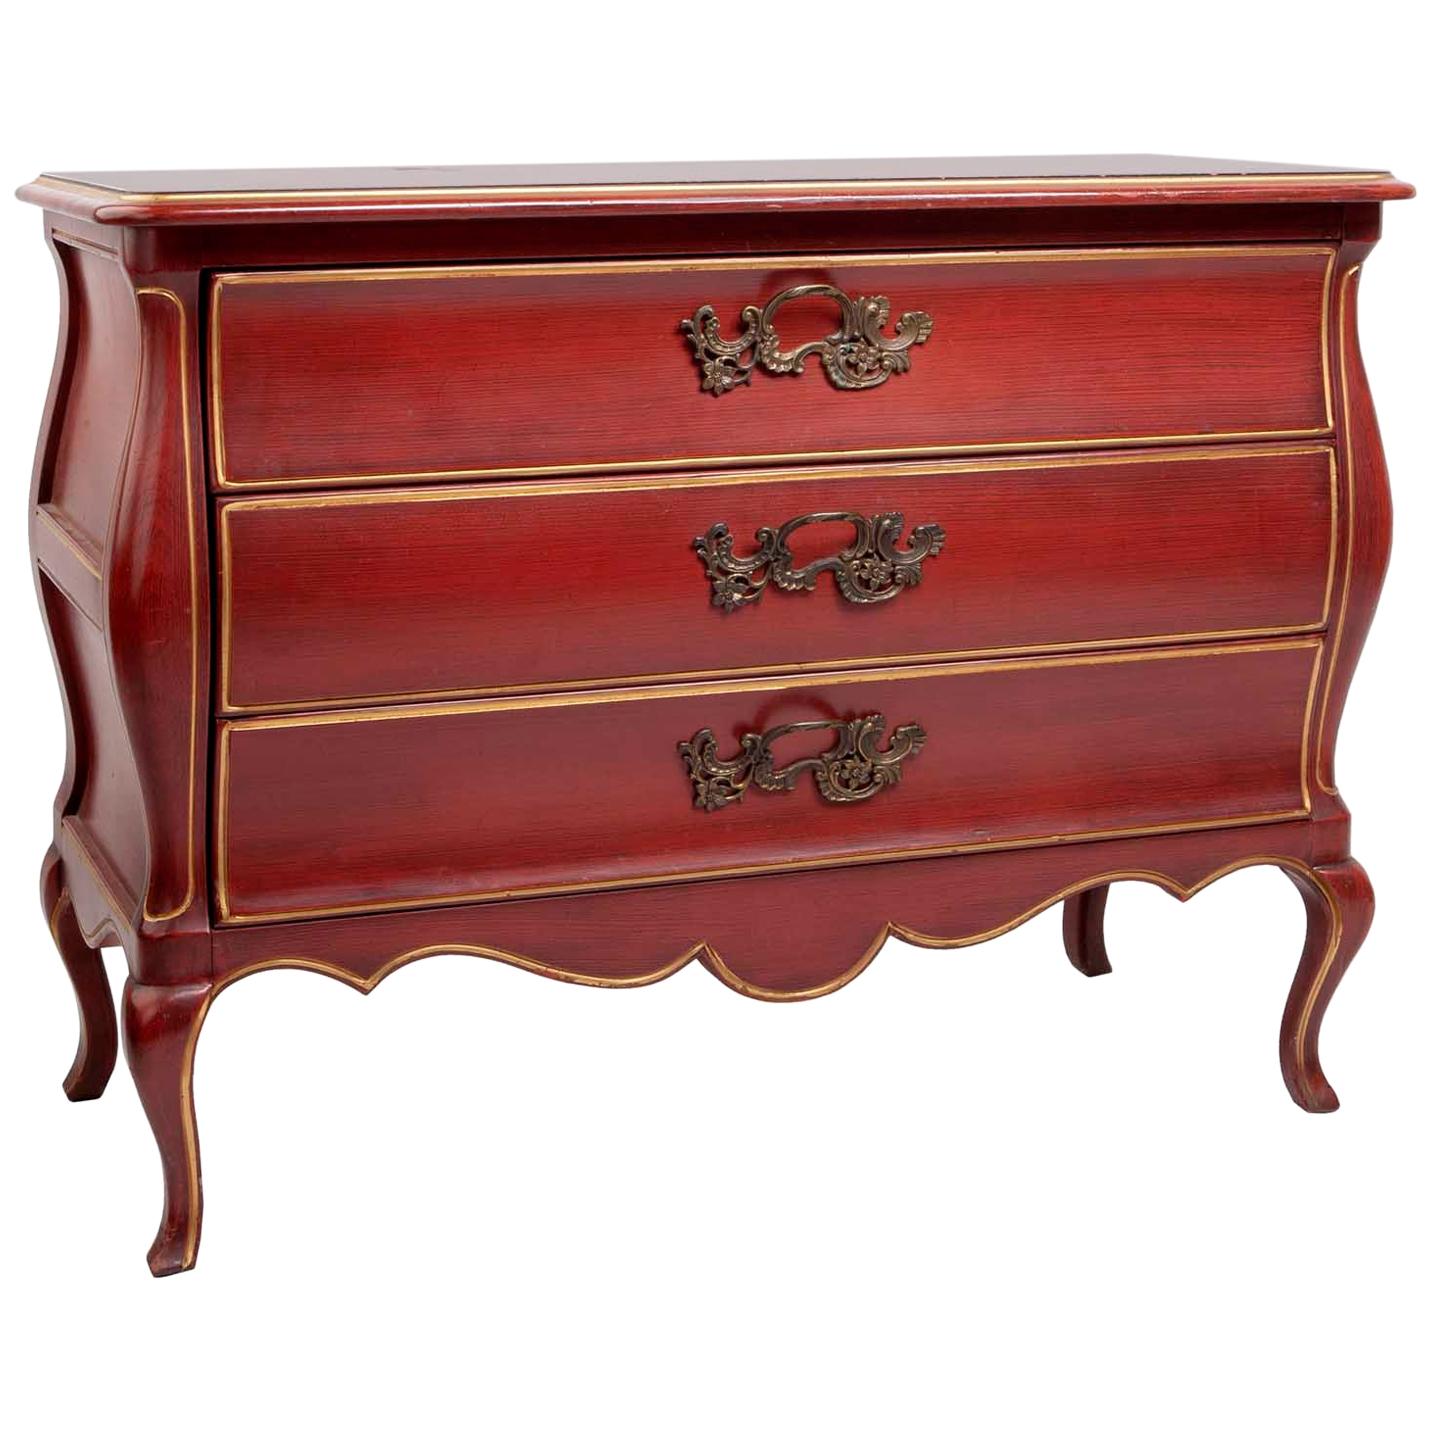 Midcentury, Chinoiserie Style, Red Lingerie Chest of Drawers with Gold Trim